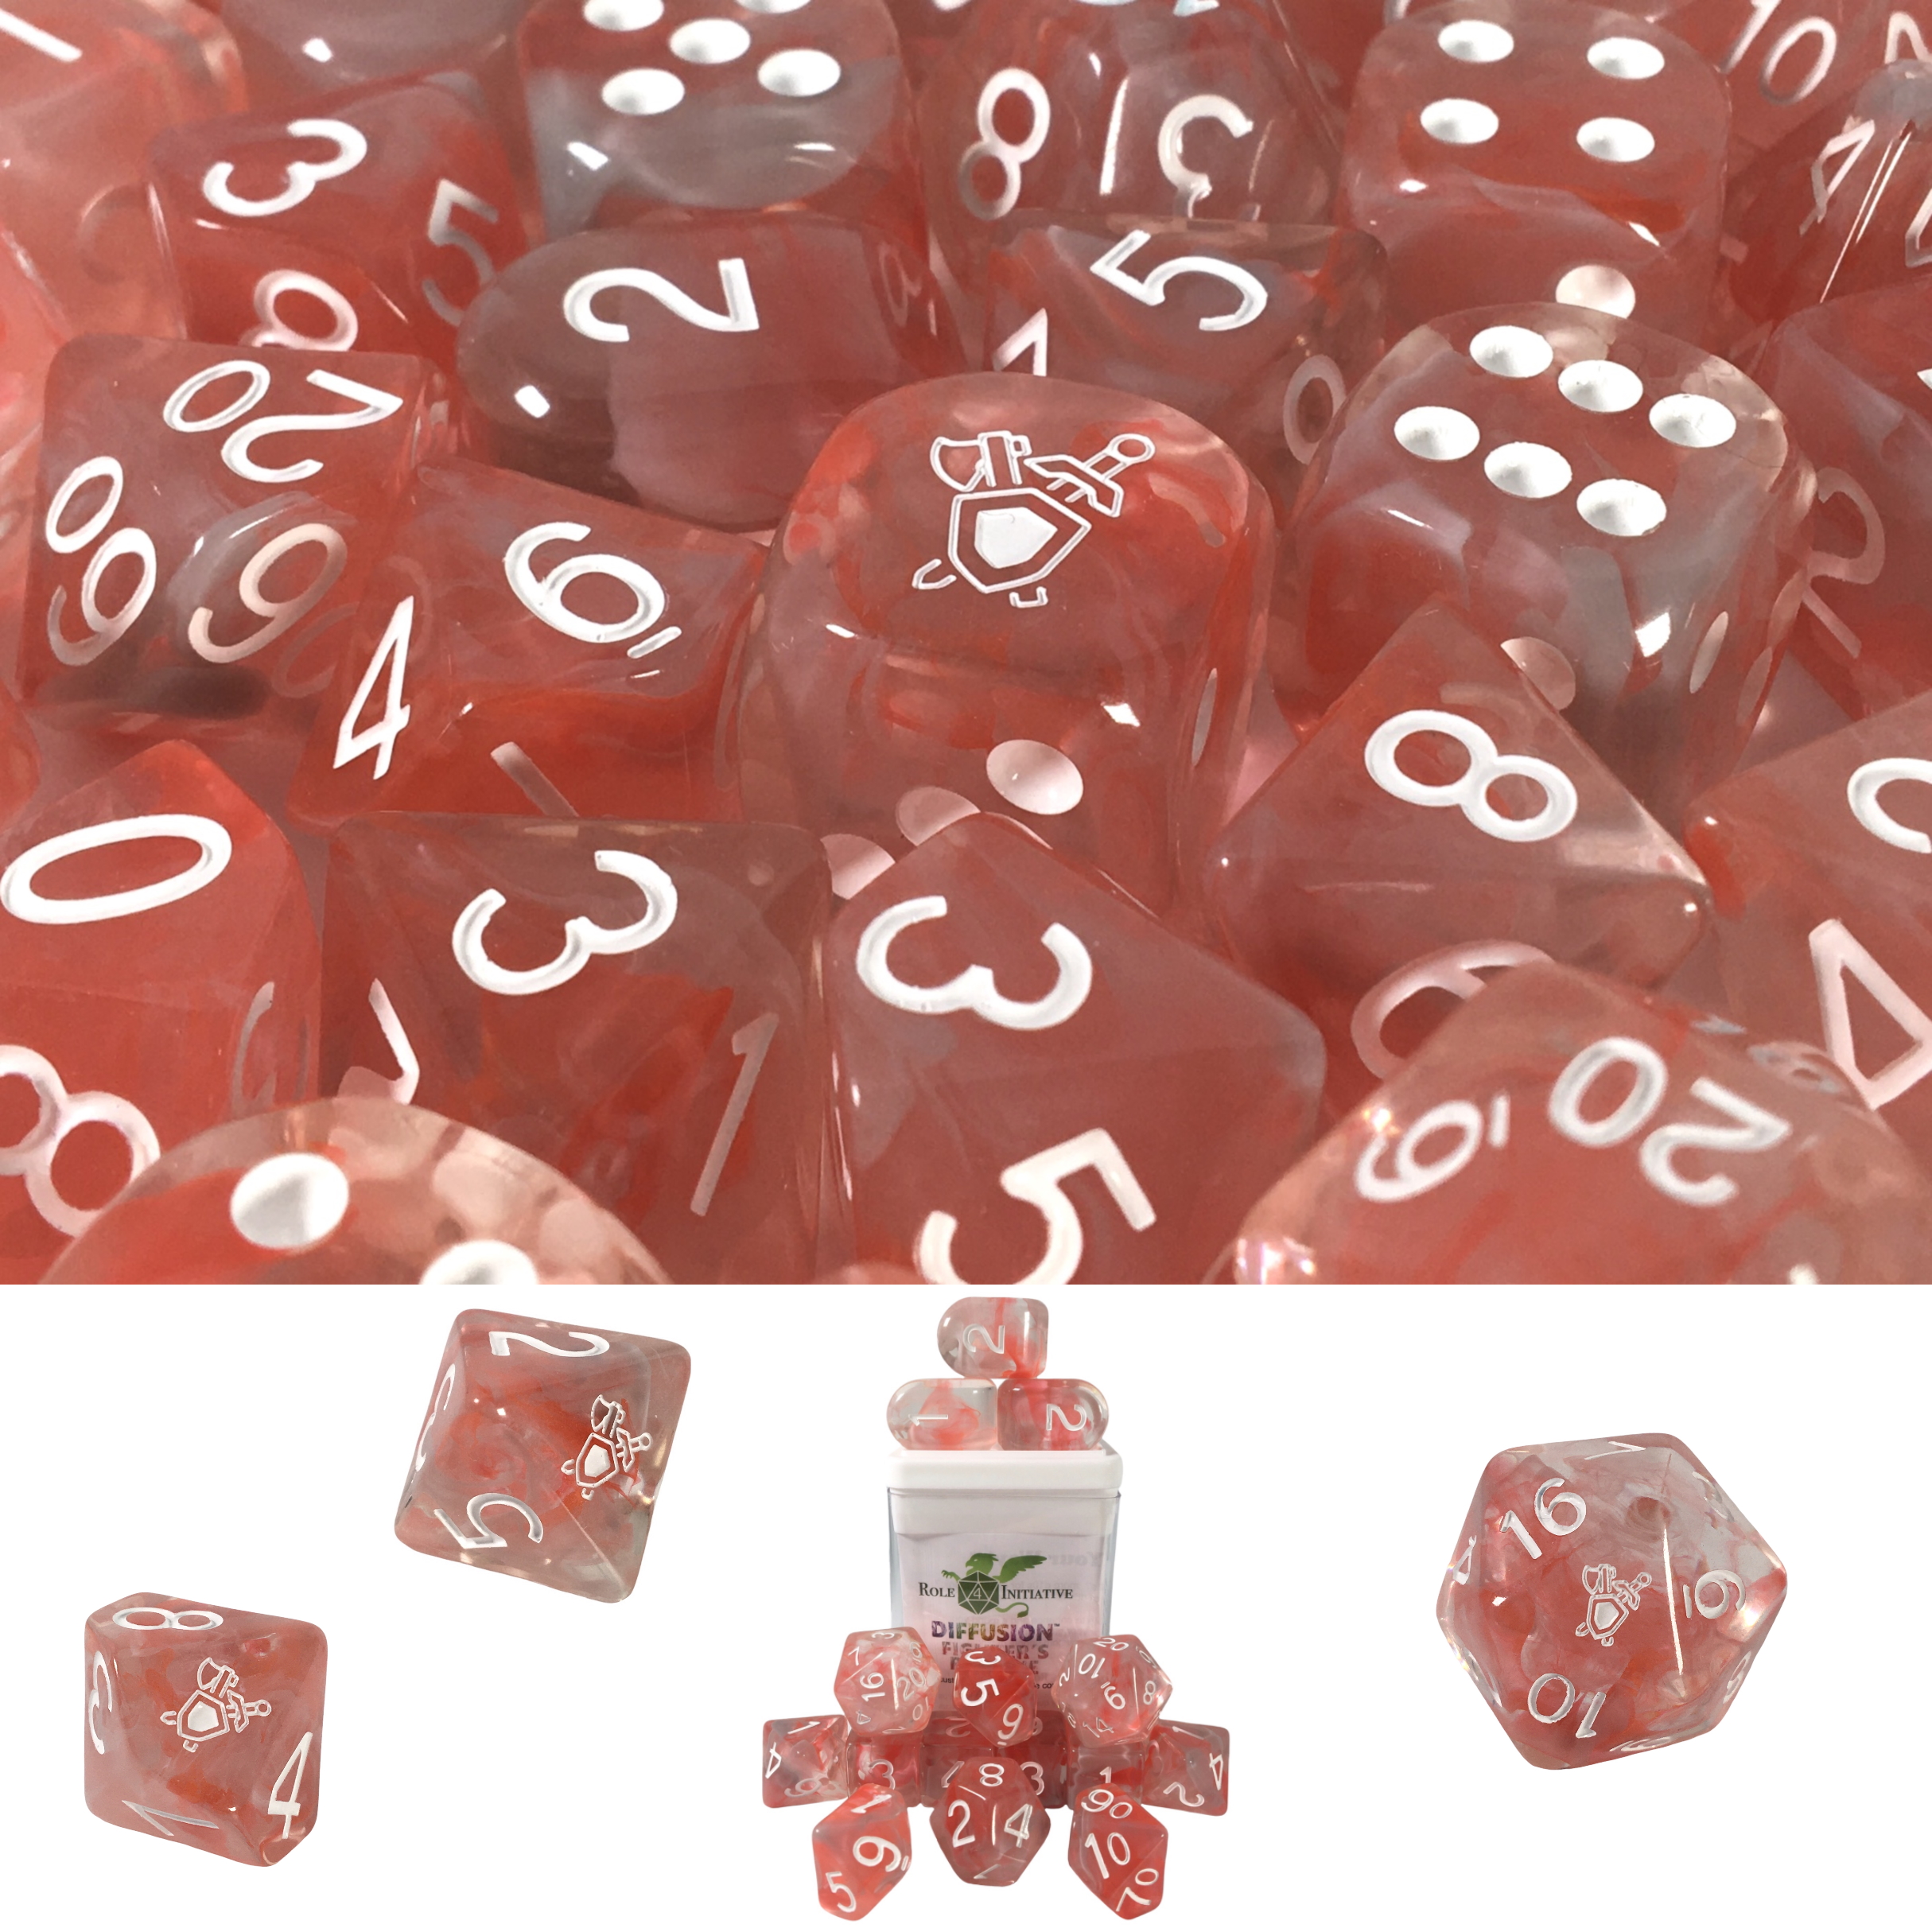 Role 4 Initiative: Polyhedral 15 Dice Set: Diffusion Fighters Resolve (Special Edition) 